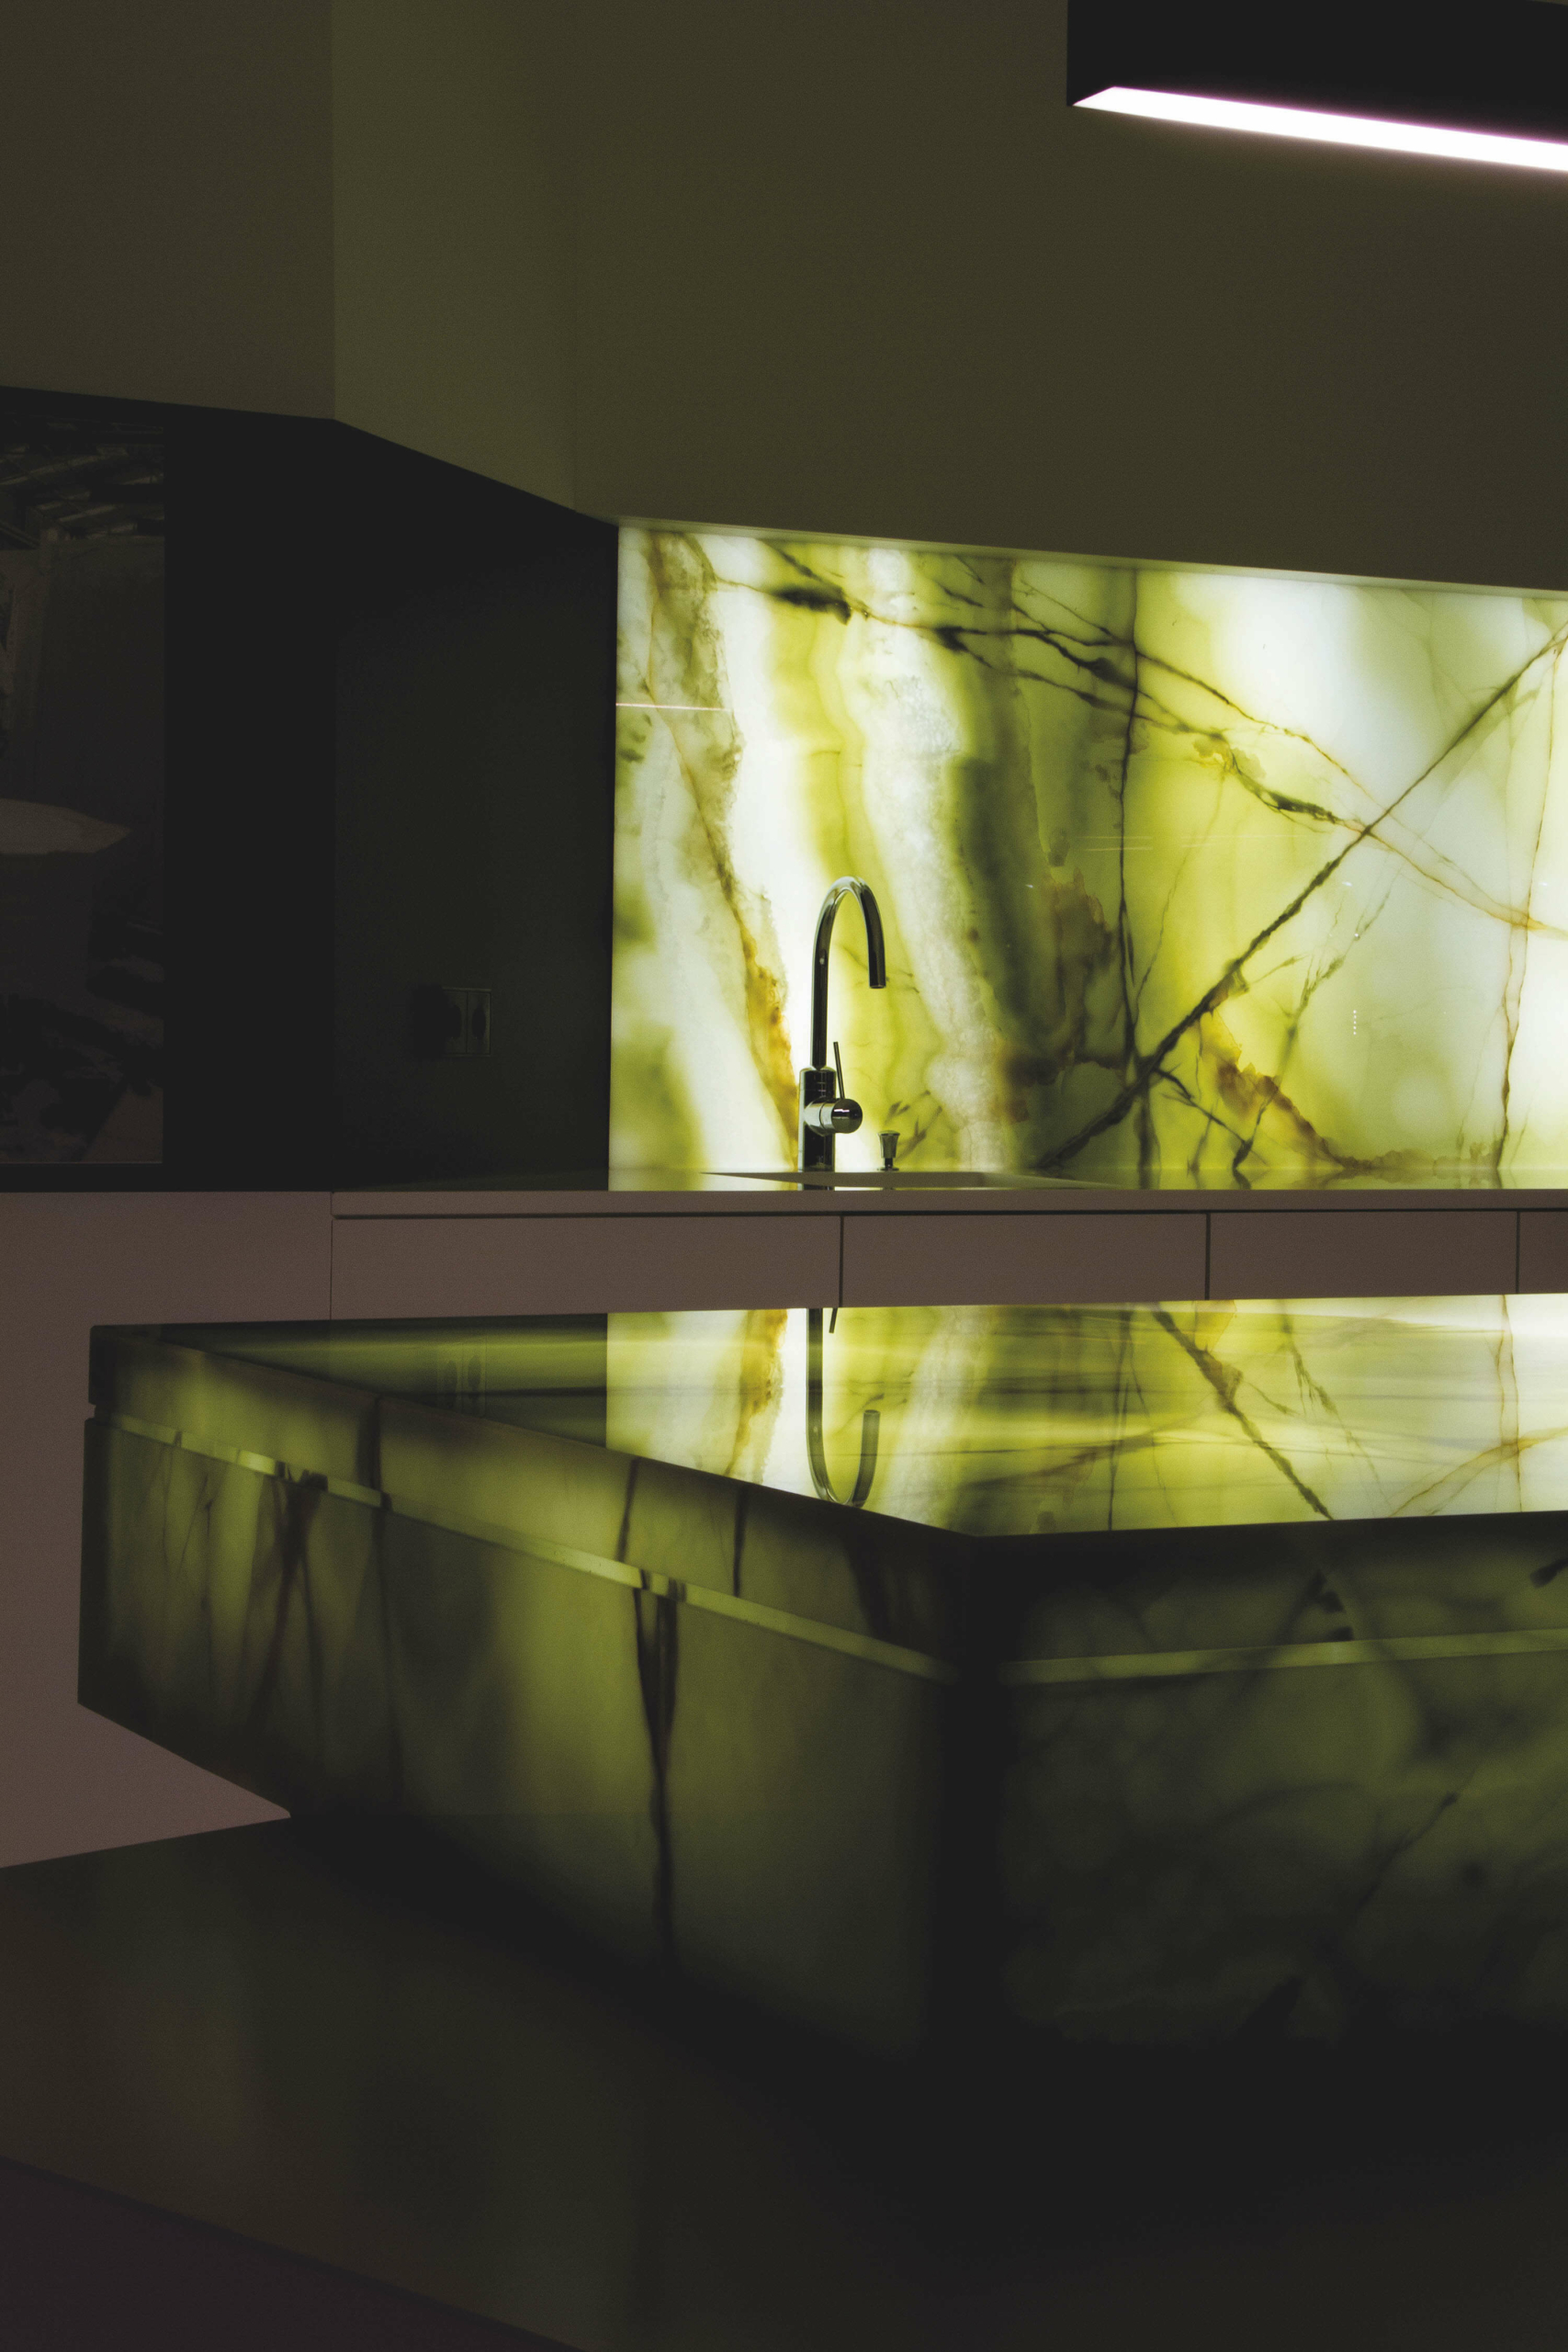 Beleuchtete LED-Küchenrückwand in Marmor Stein Optik; LED kitchen wall panel: The glass behind the natural stone (marble) illuminates the room.